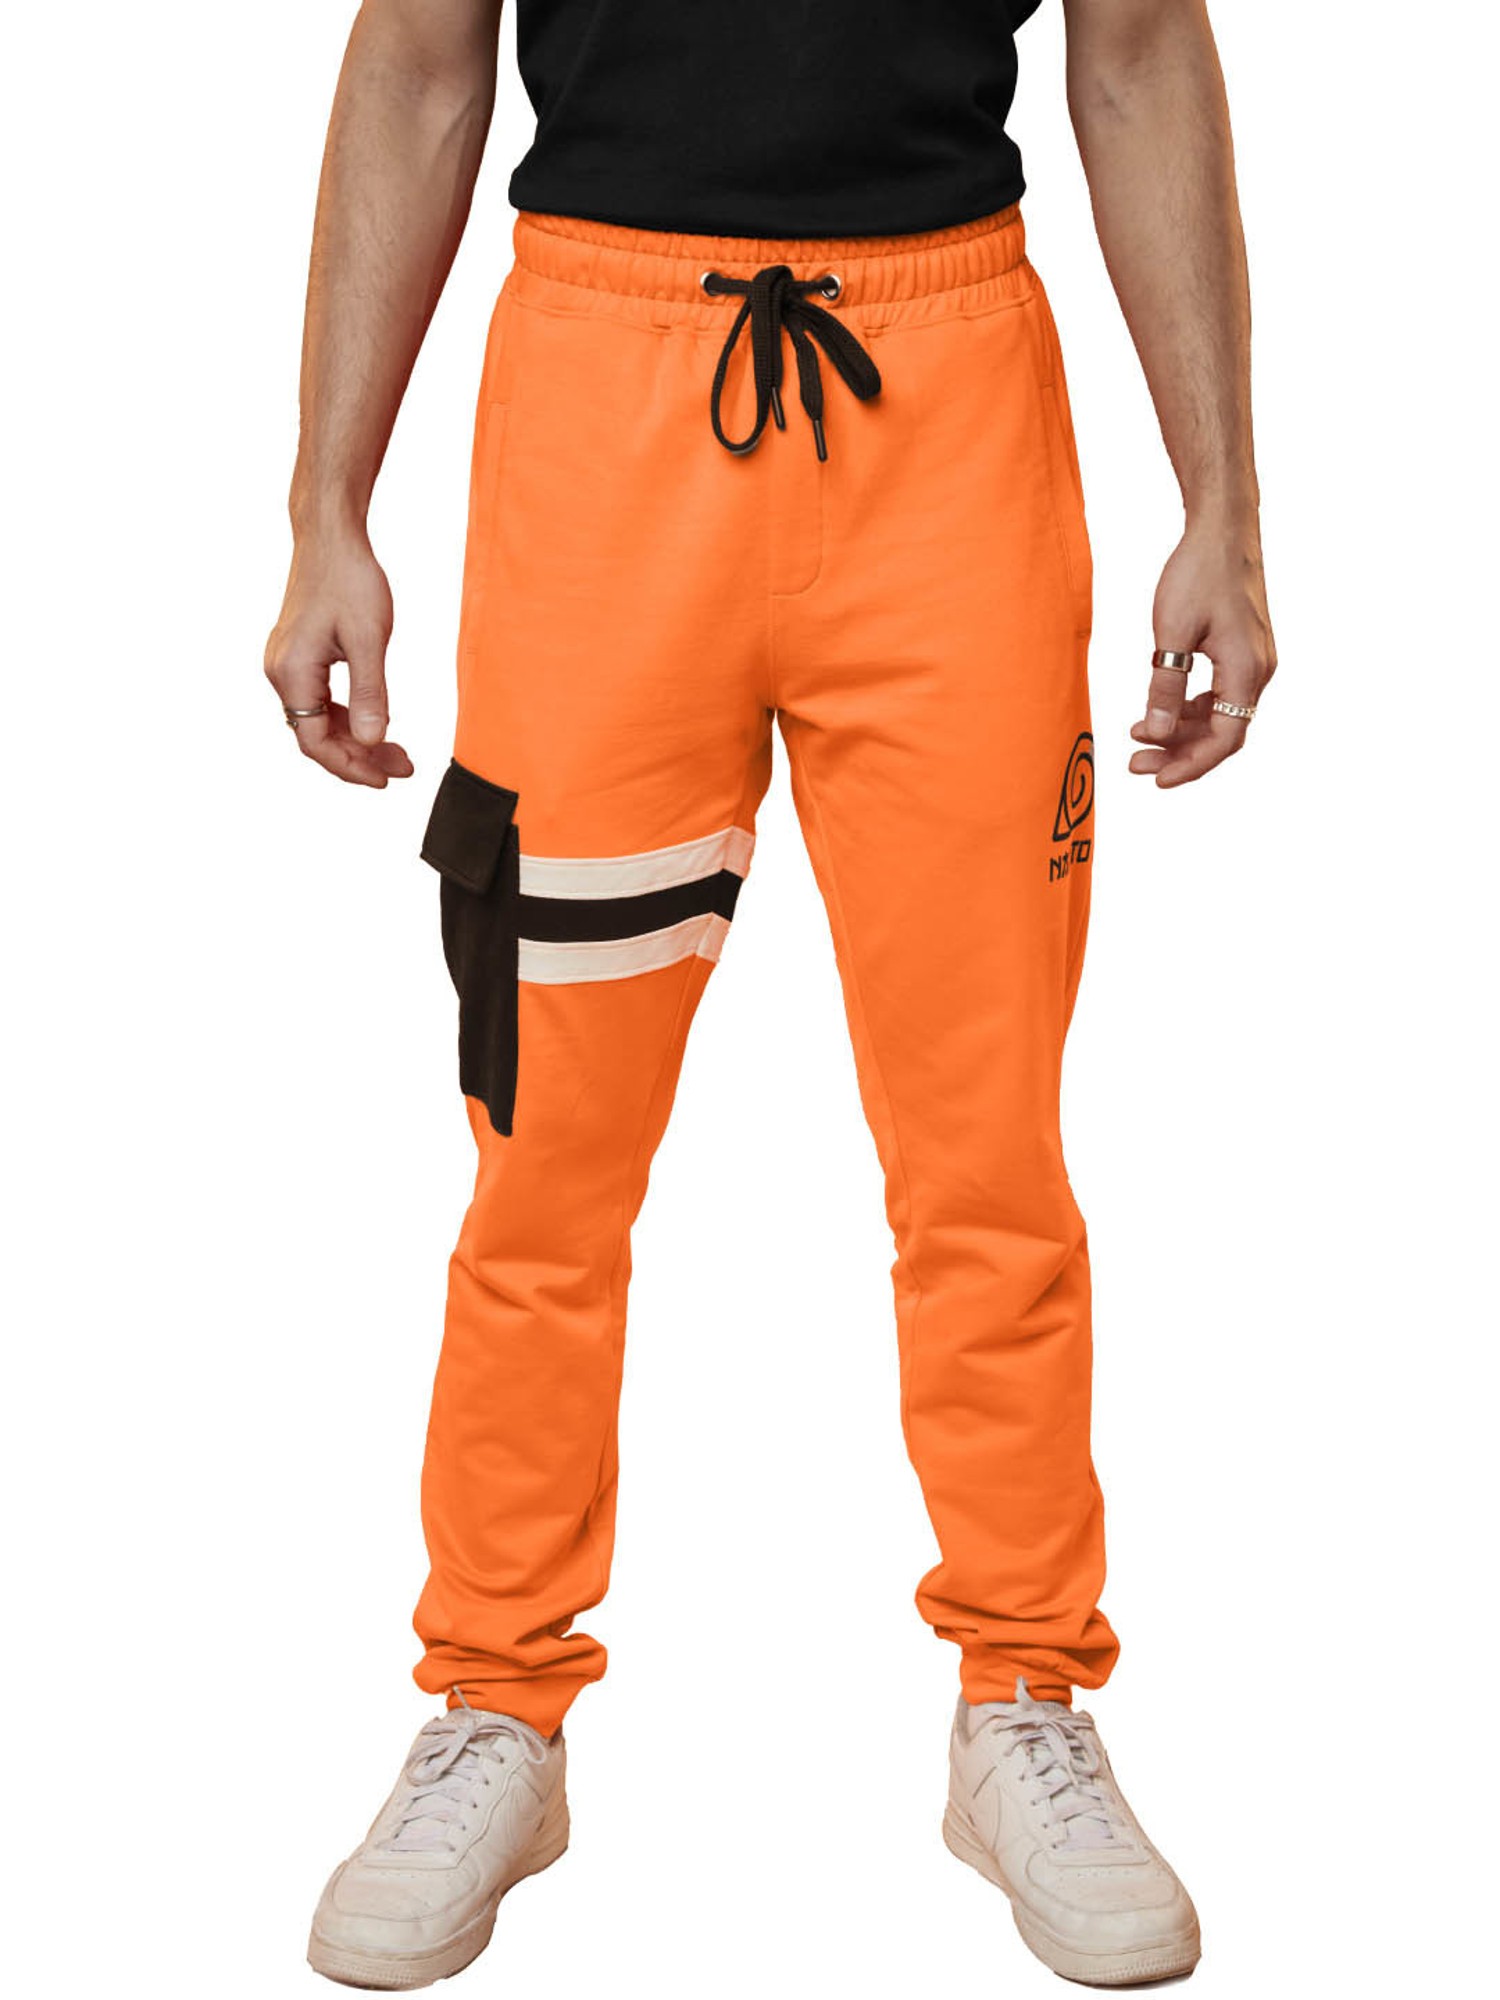 Bang Safety Work Wear Cargo Pants with 6 Pockets  220 GSM Cotton Orange  Small  28  Amazonin Industrial  Scientific